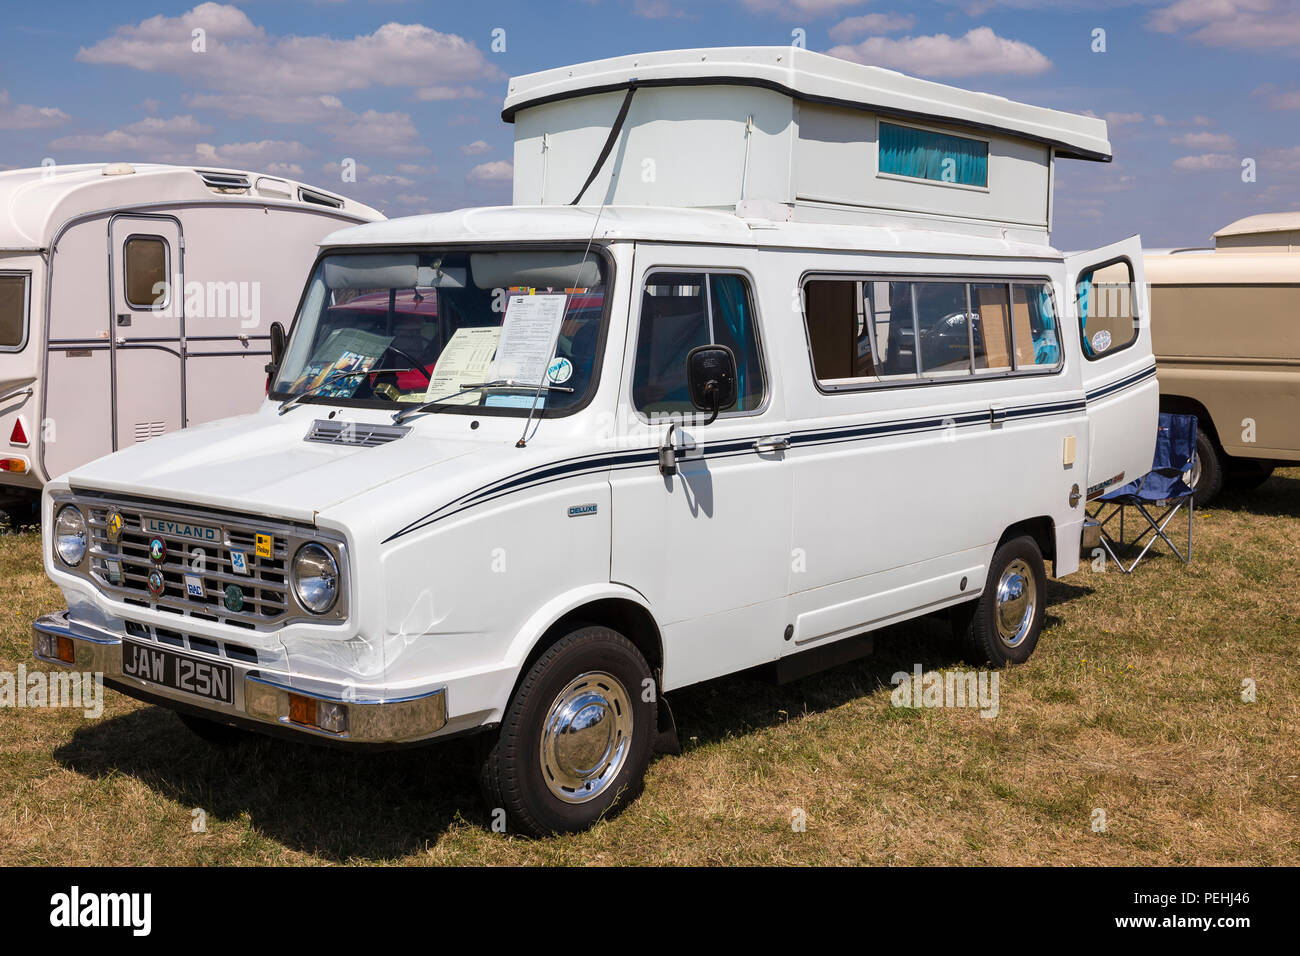 Pop-up roof extension in A 1970s  British Leyland Sherpa 240 Autosleeper motor caravan at an English show in 2018 Stock Photo